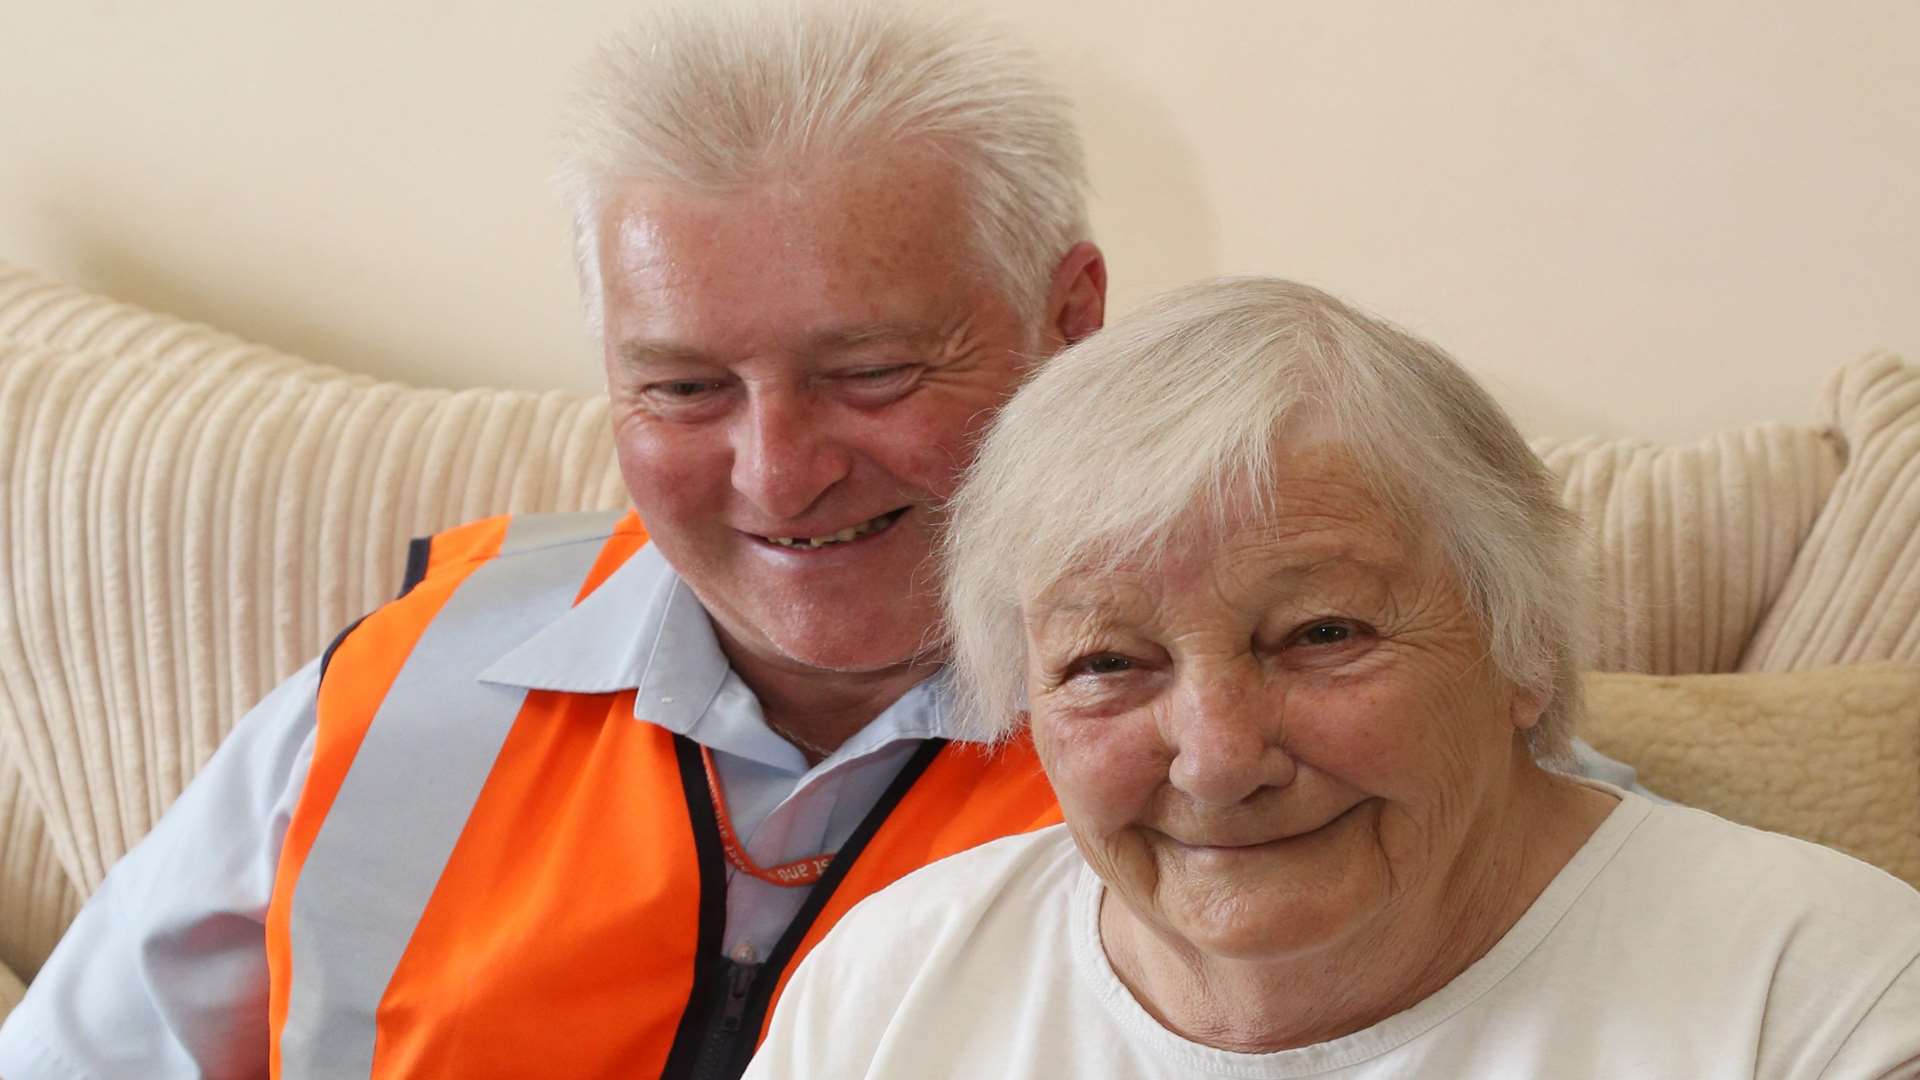 Postman Jeff alerted the emergency services when Margaret had a heart attack